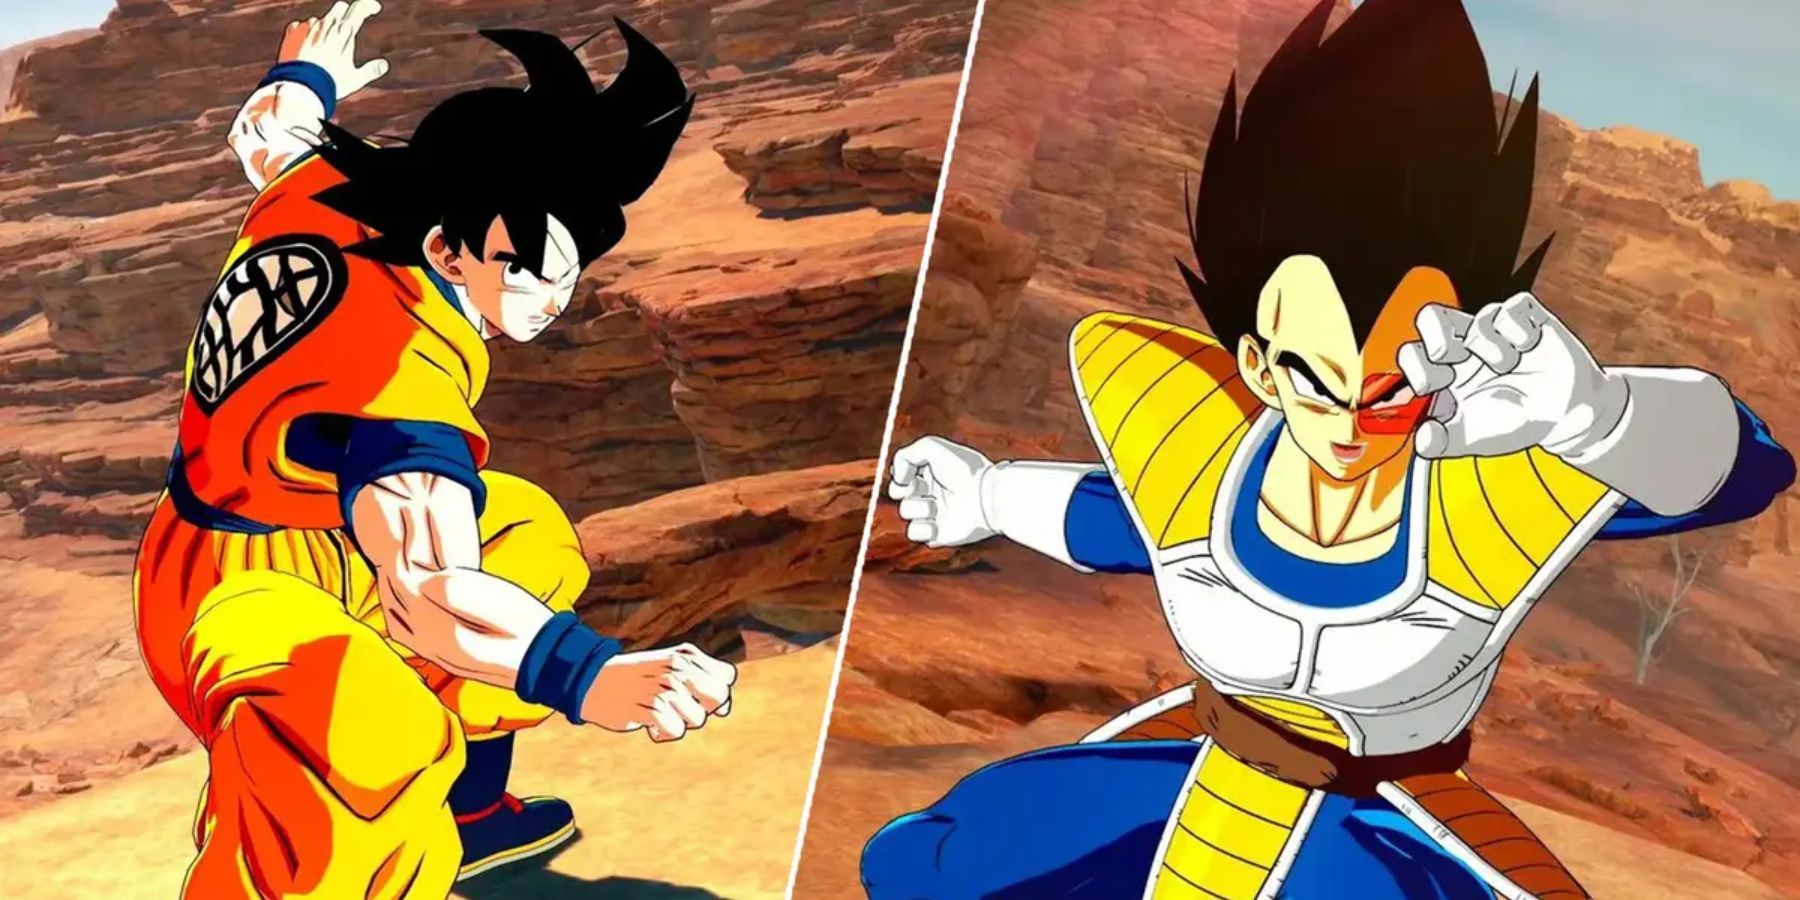 Dragon Ball: Sparking Zero Sounds the Alarm of a Dying, but Beloved Feature